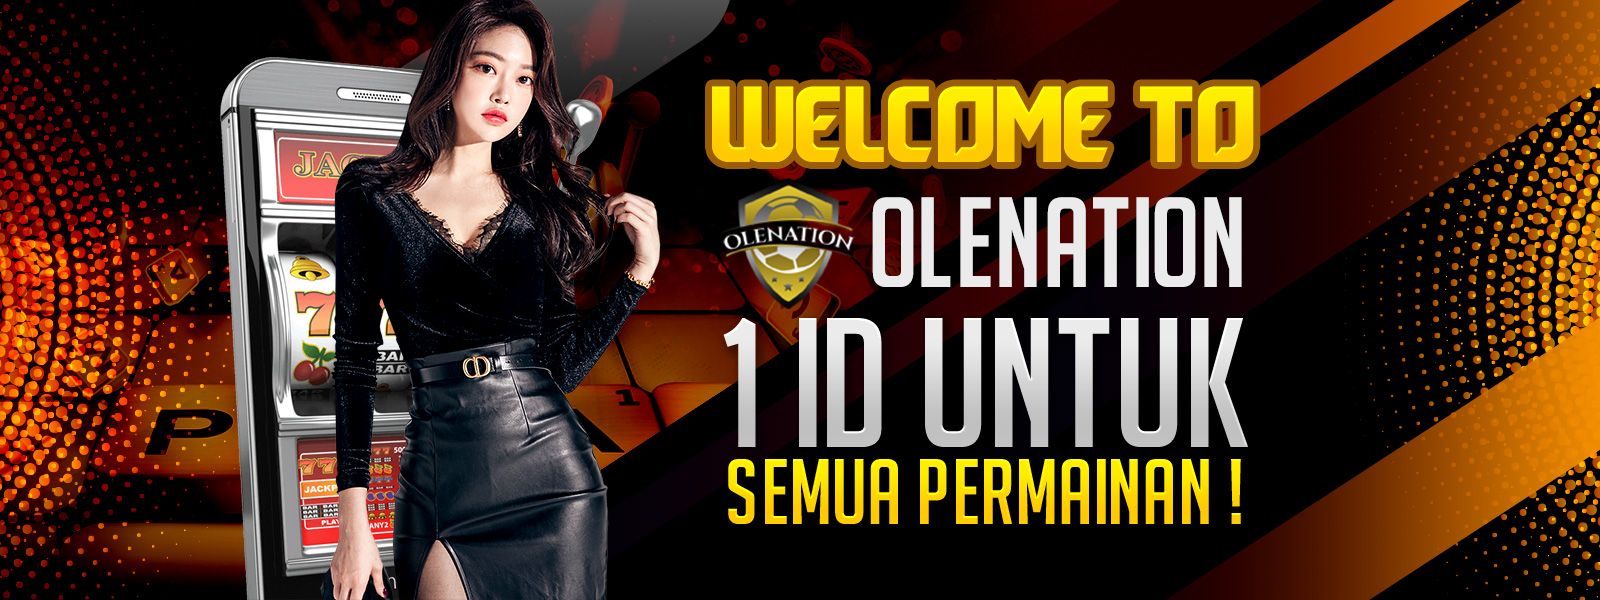 Welcome To Olenation